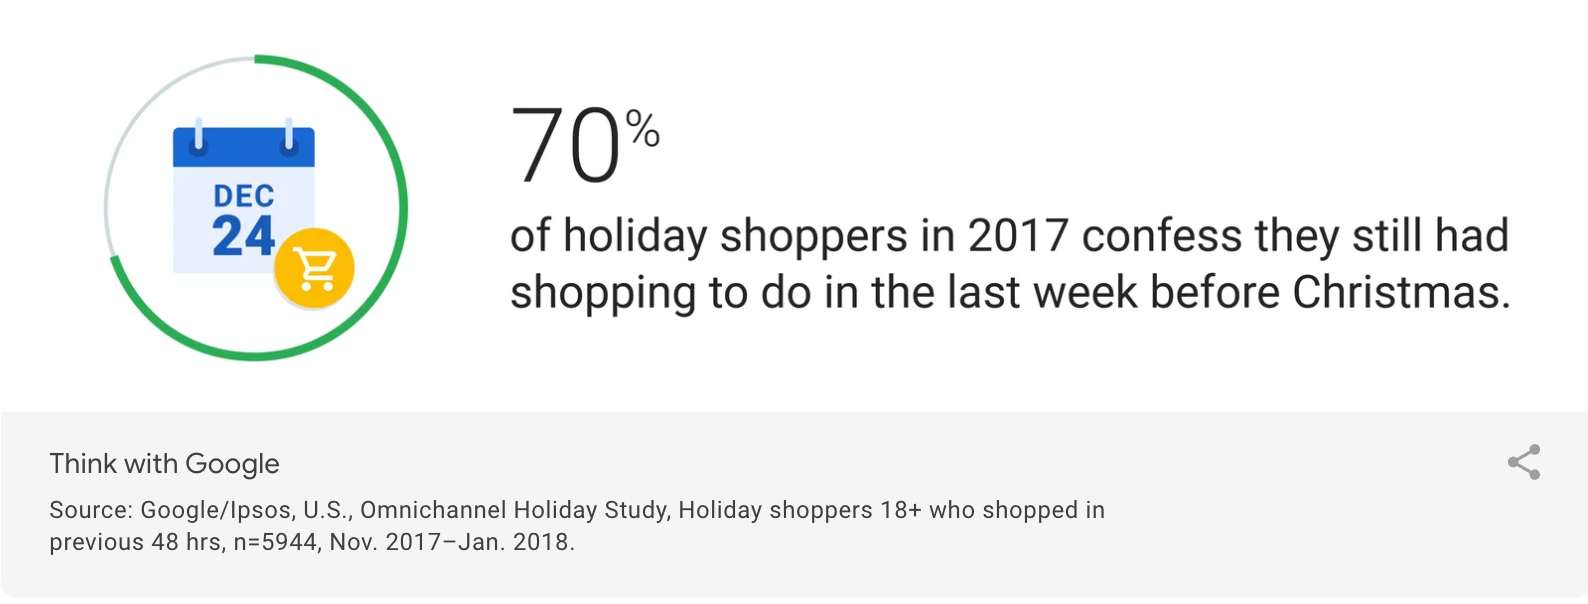 last minute holiday shoppers statistics